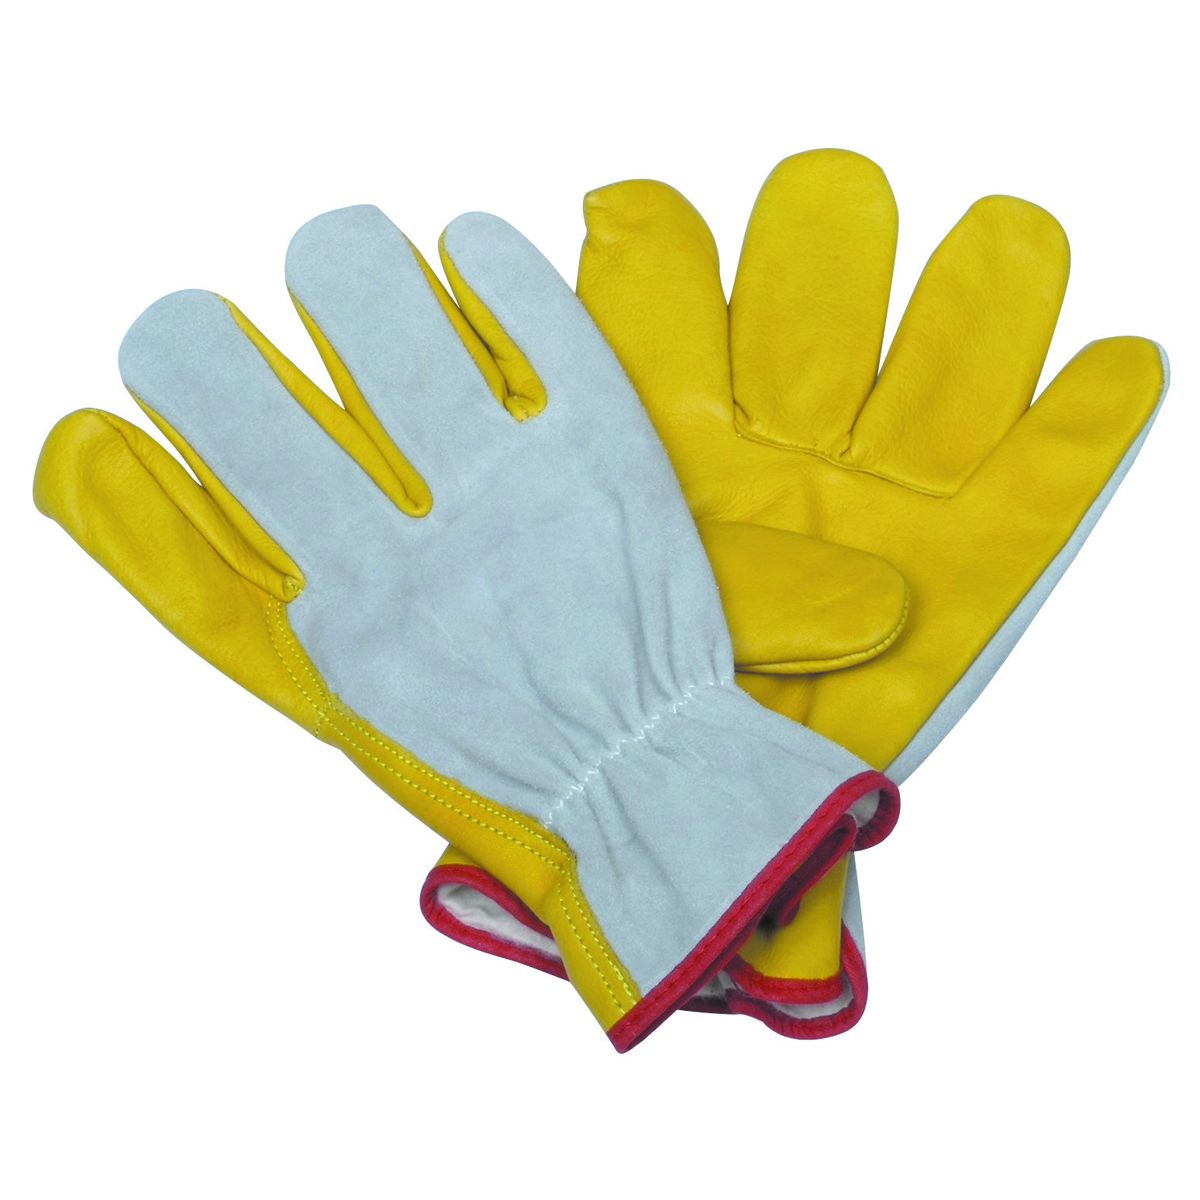 HARDY Top Grain Leather Utility Gloves